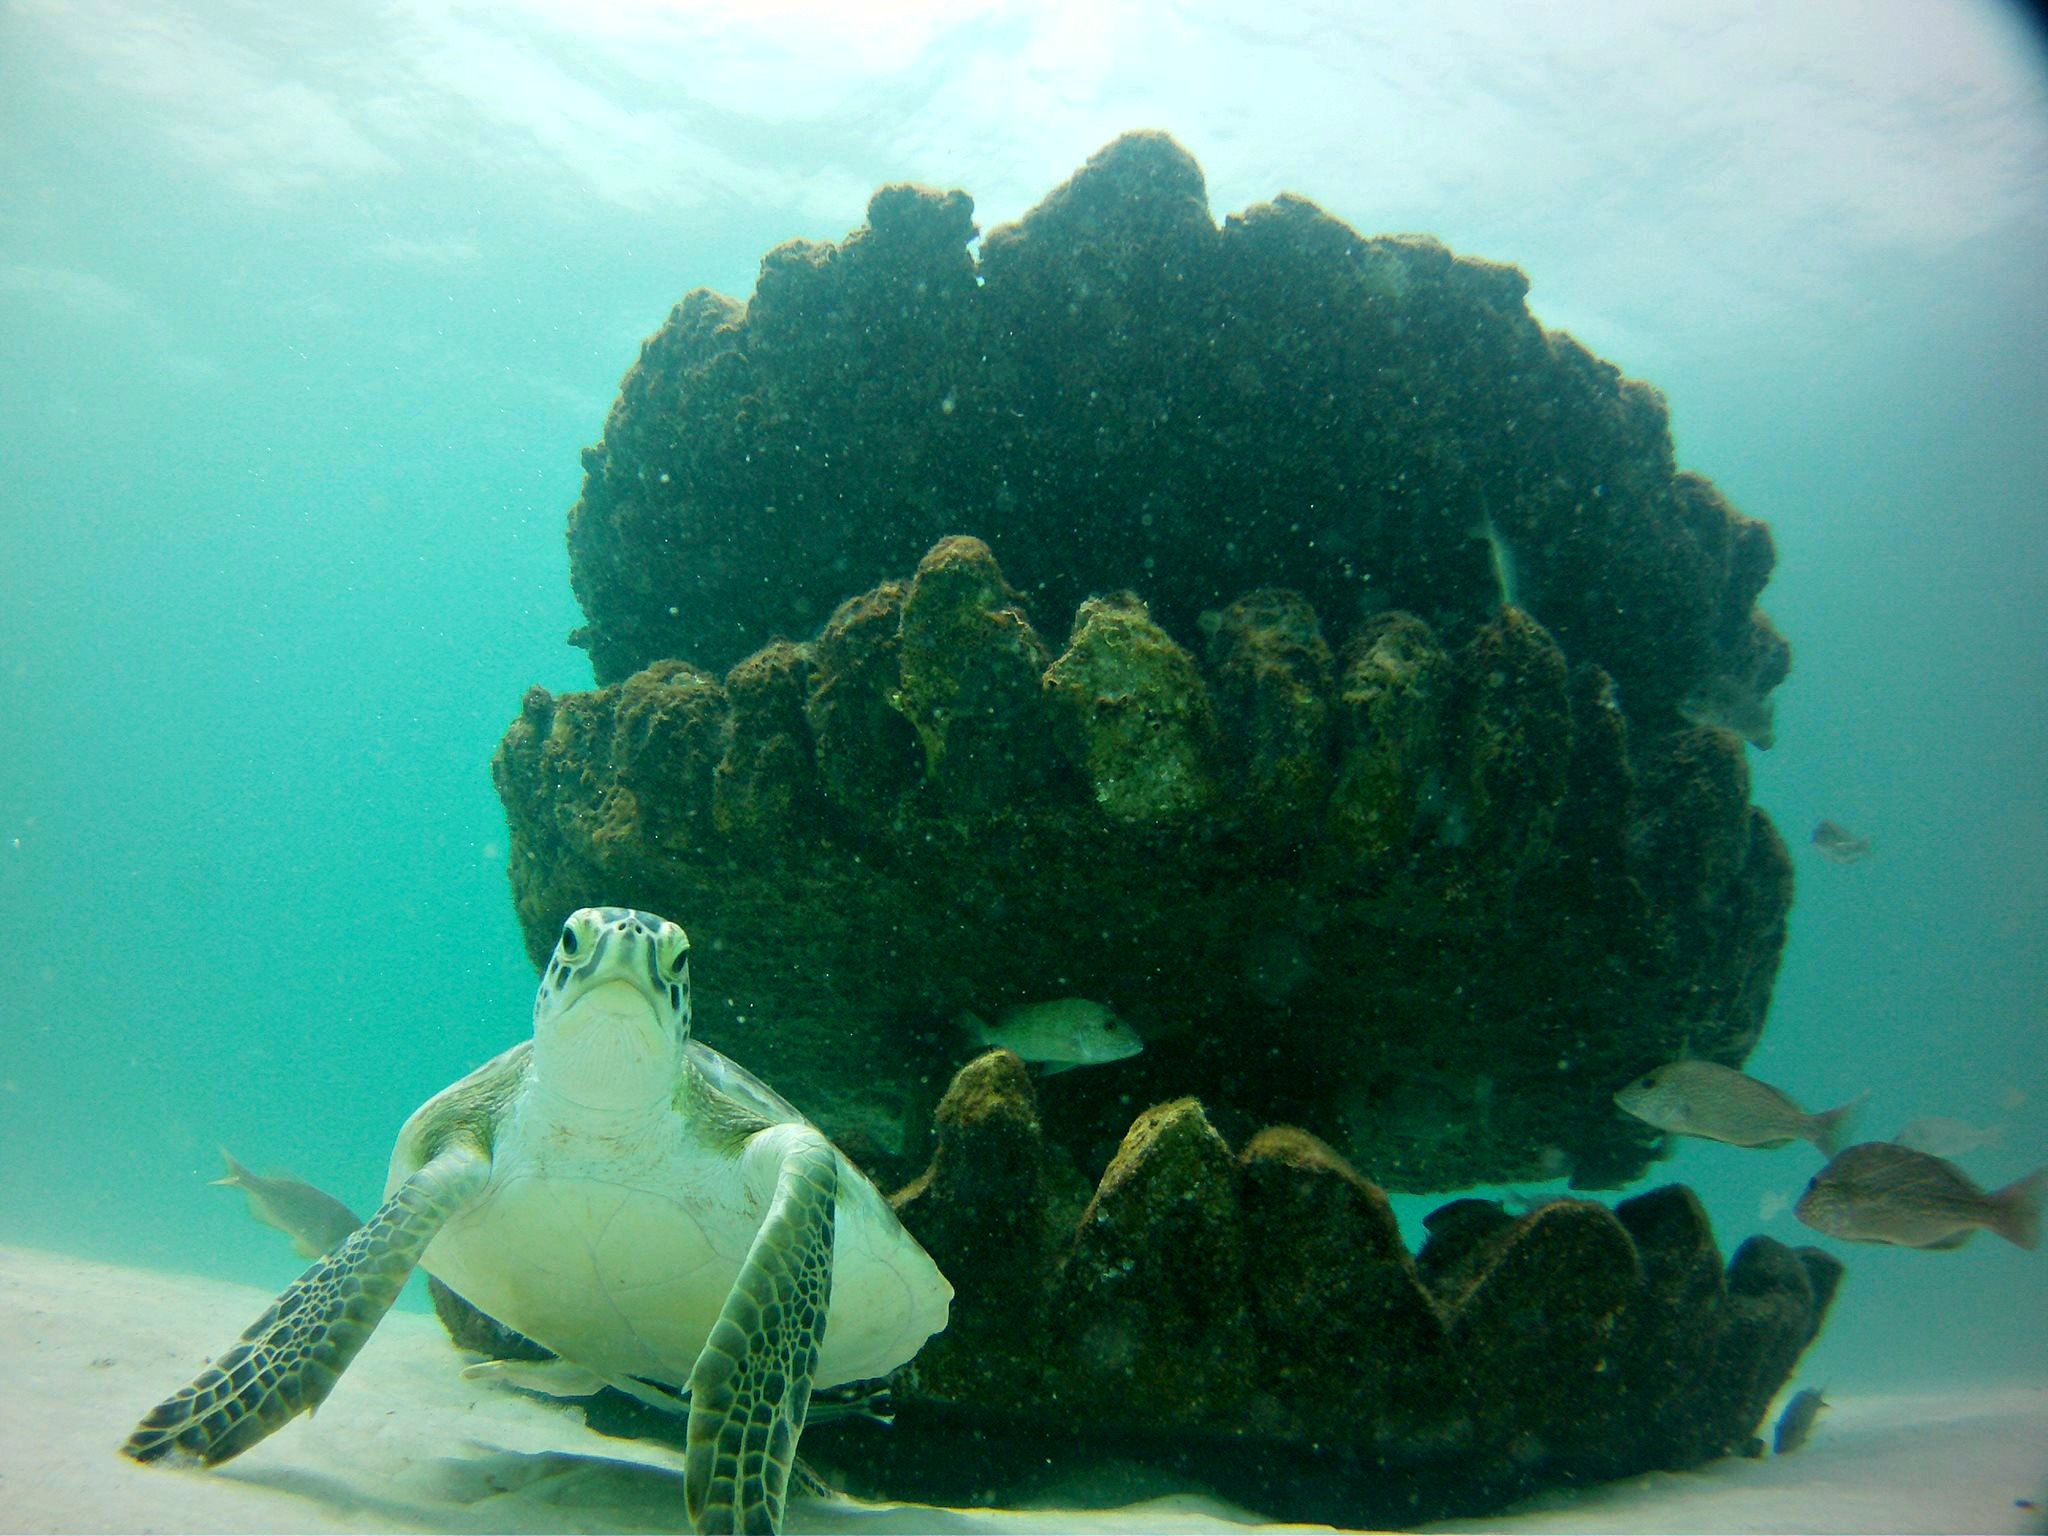 Giant sea turtle beside part of the artificial reef in the Gulf off the coast of Navarre Beach, Florida.